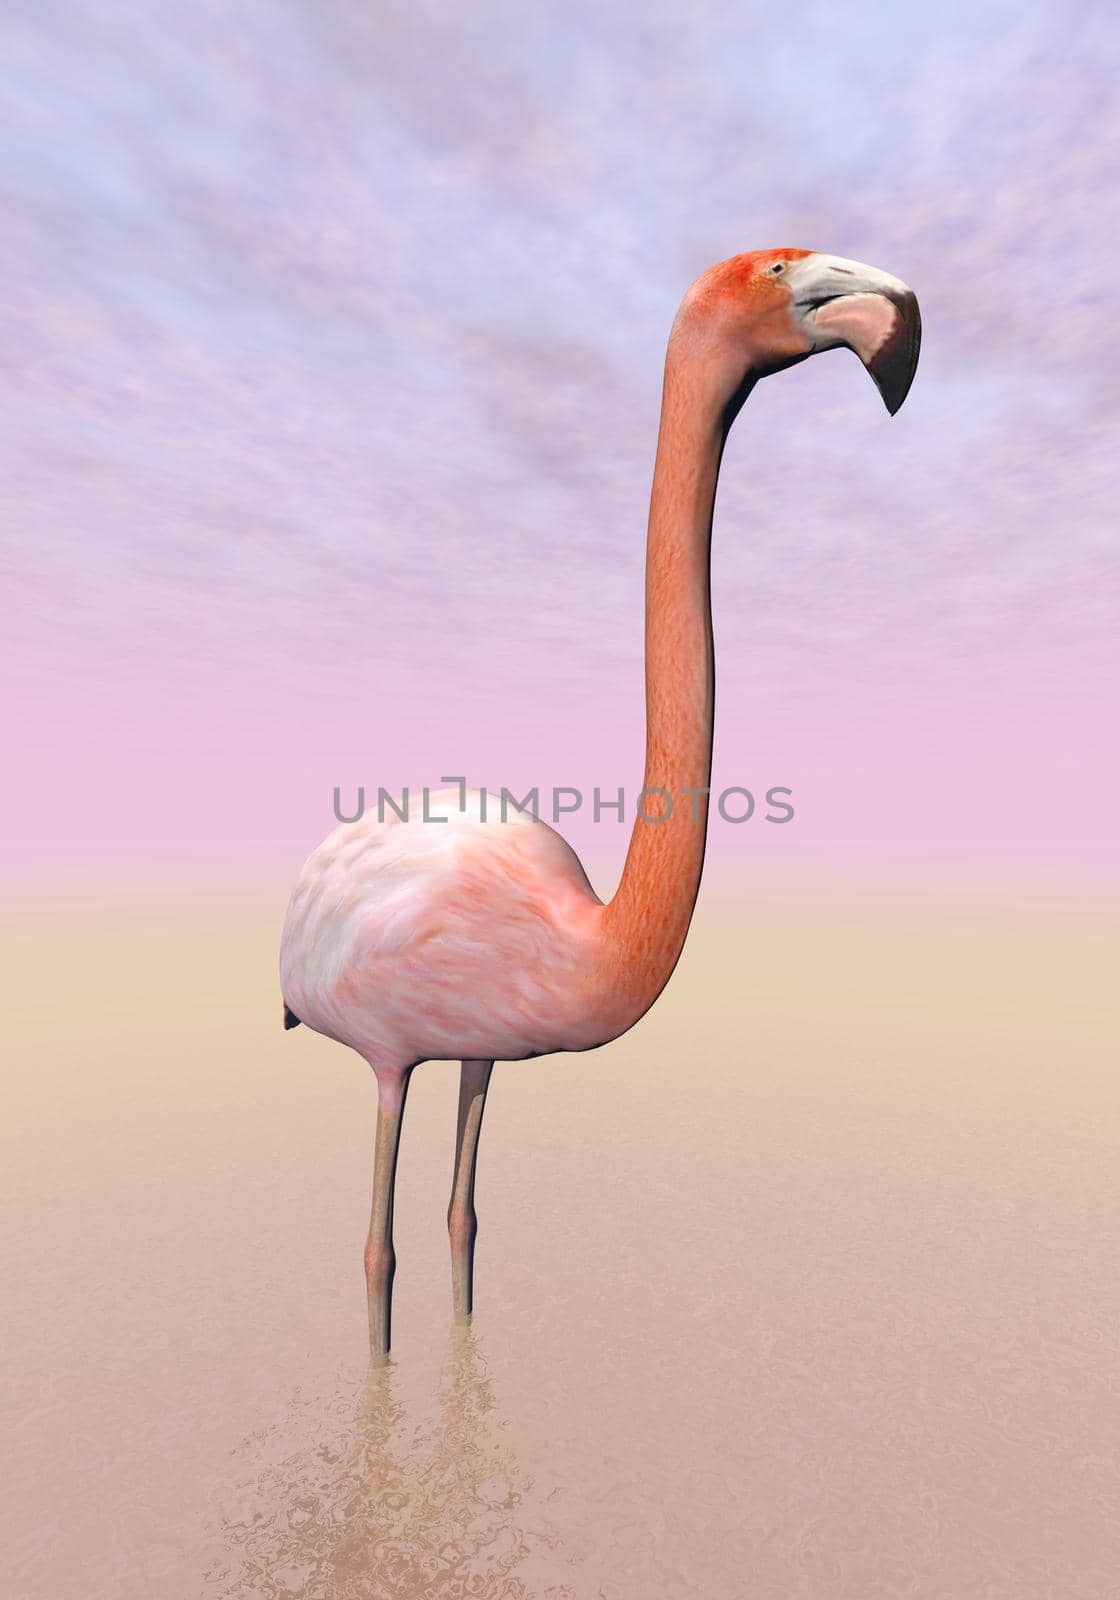 Single beautiful pink flamingo in the water and violet sky